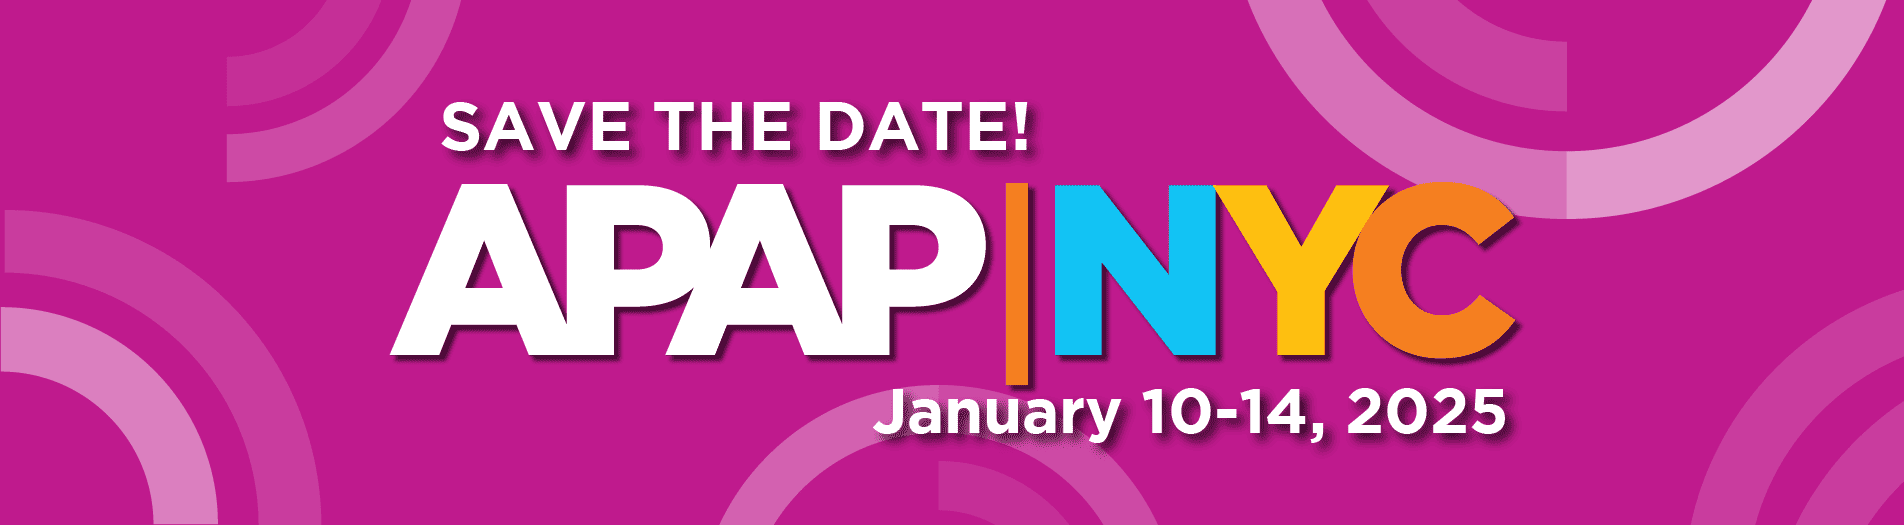 Pink APAP|NYC graphic that says save the date January 10-14, 2025